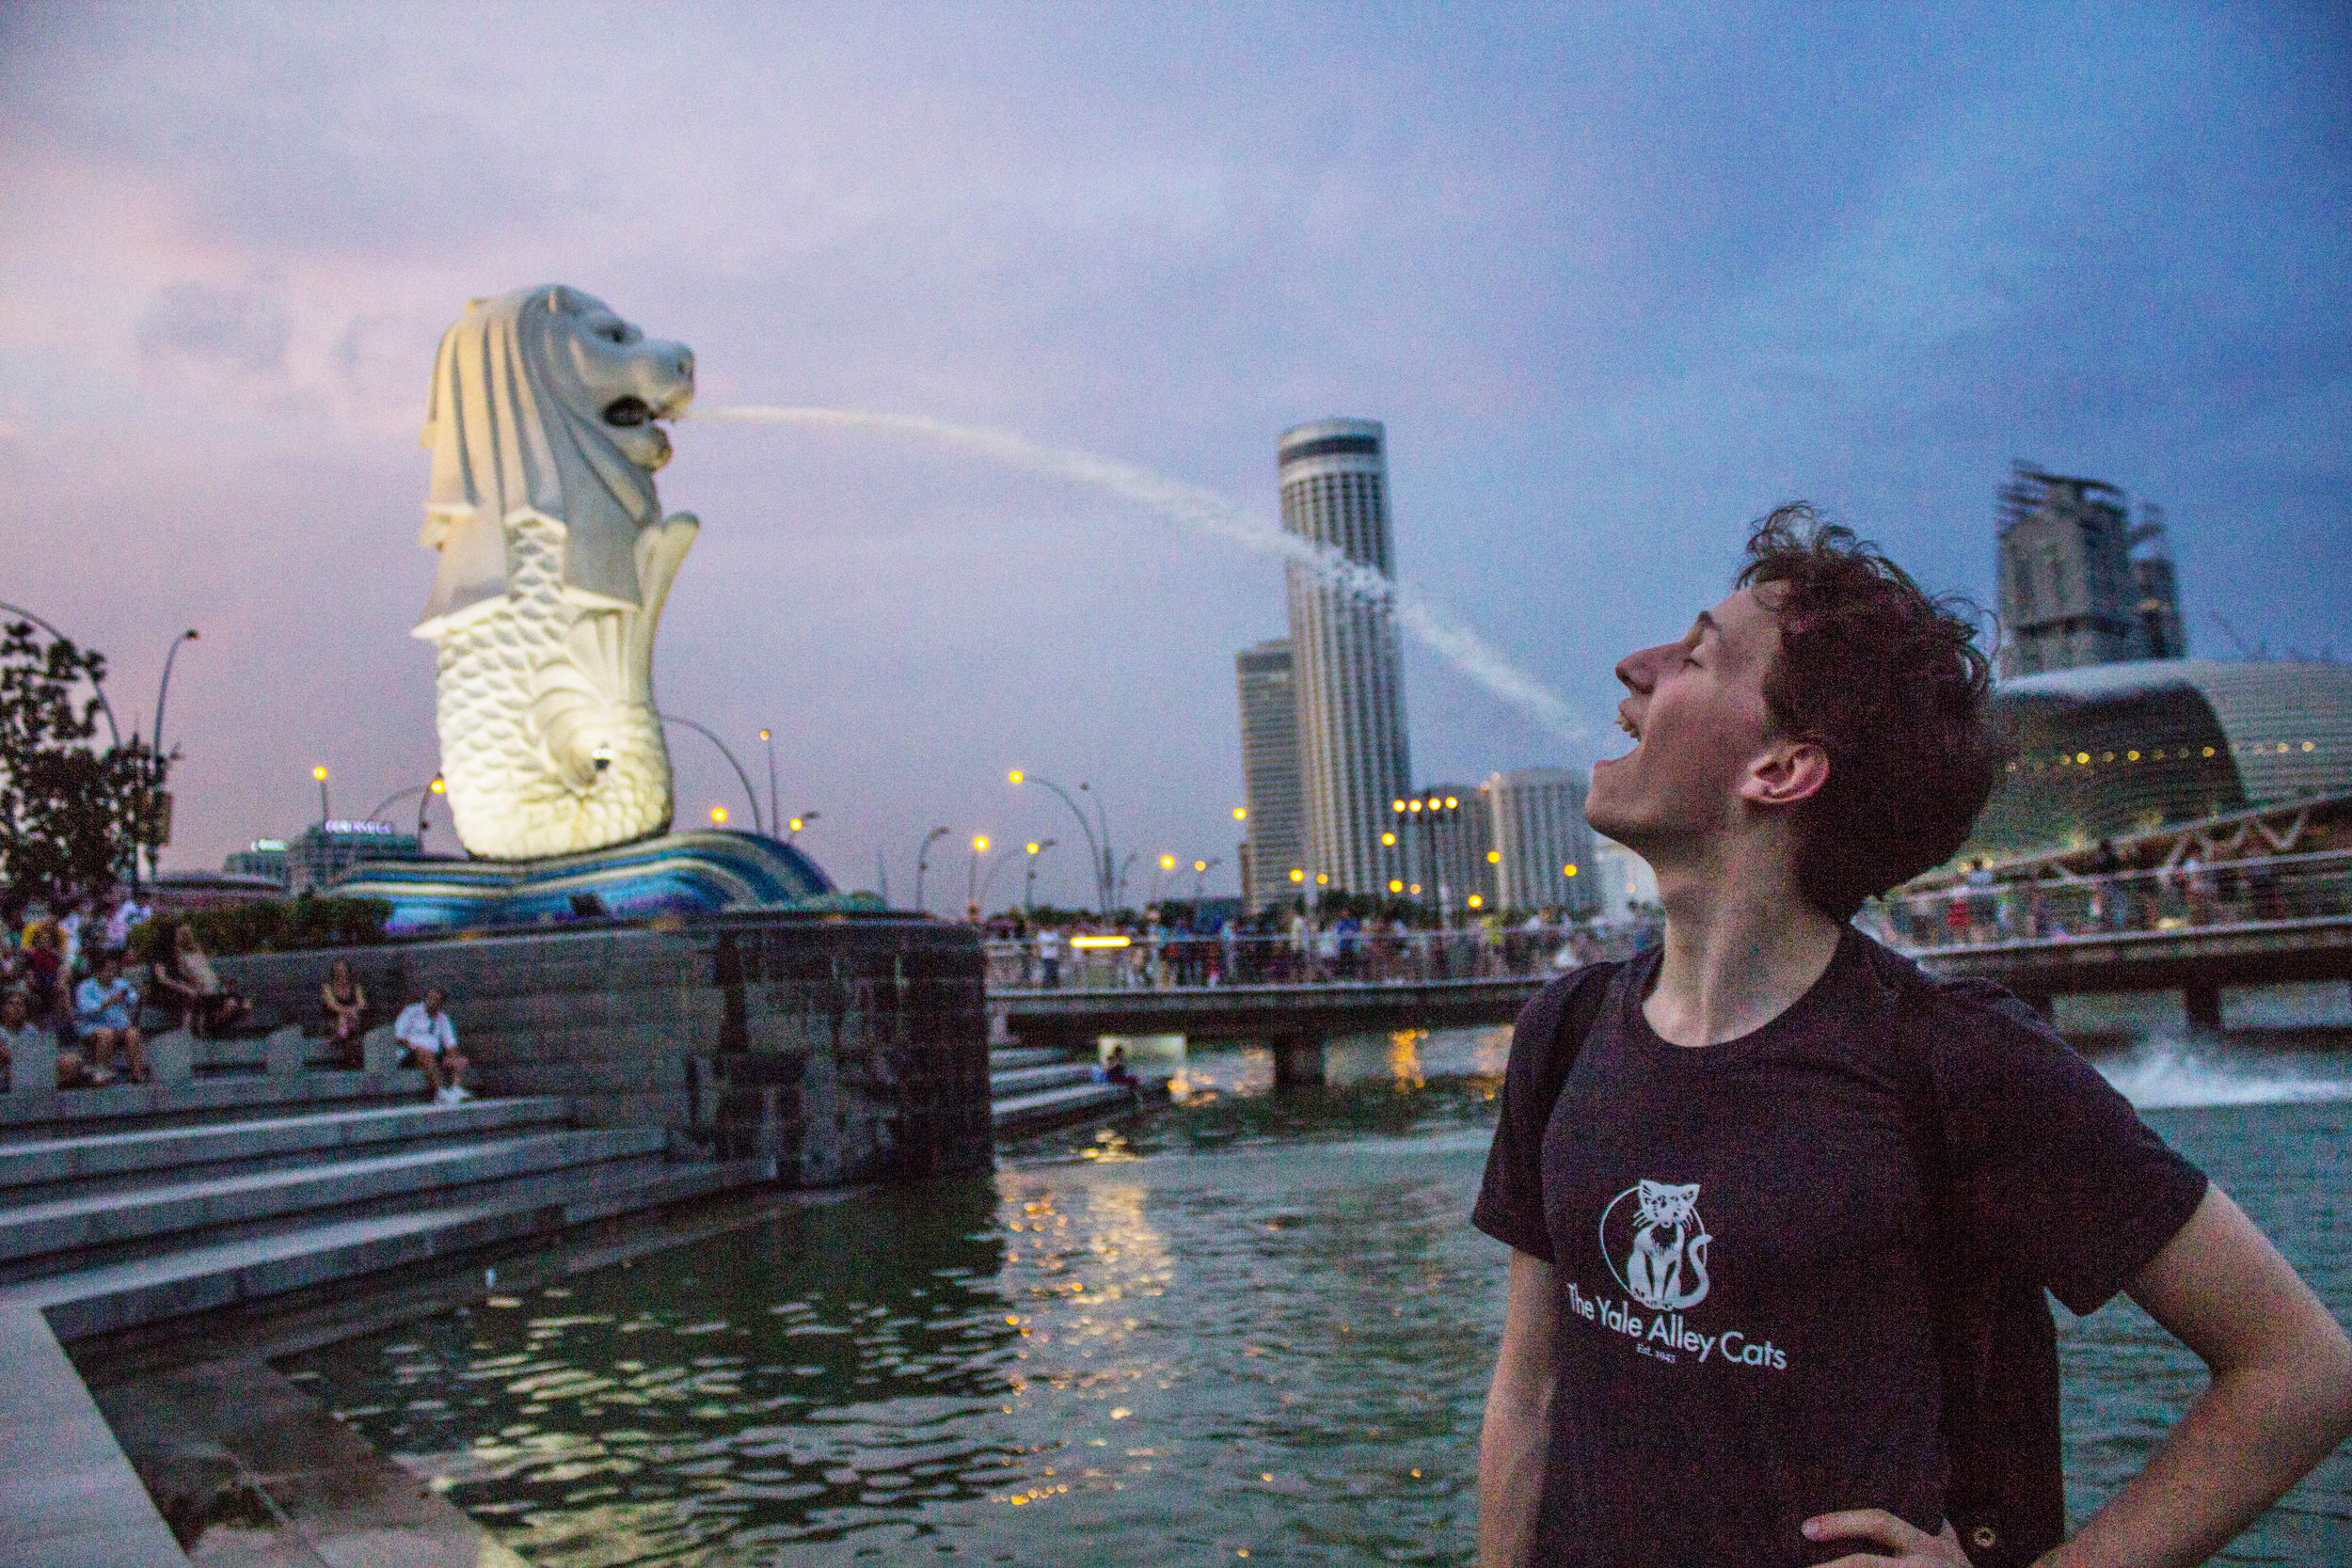 Not even a stroll through the iconic Merlion Park can quench our thirst for Singapore, on our last day of tour!